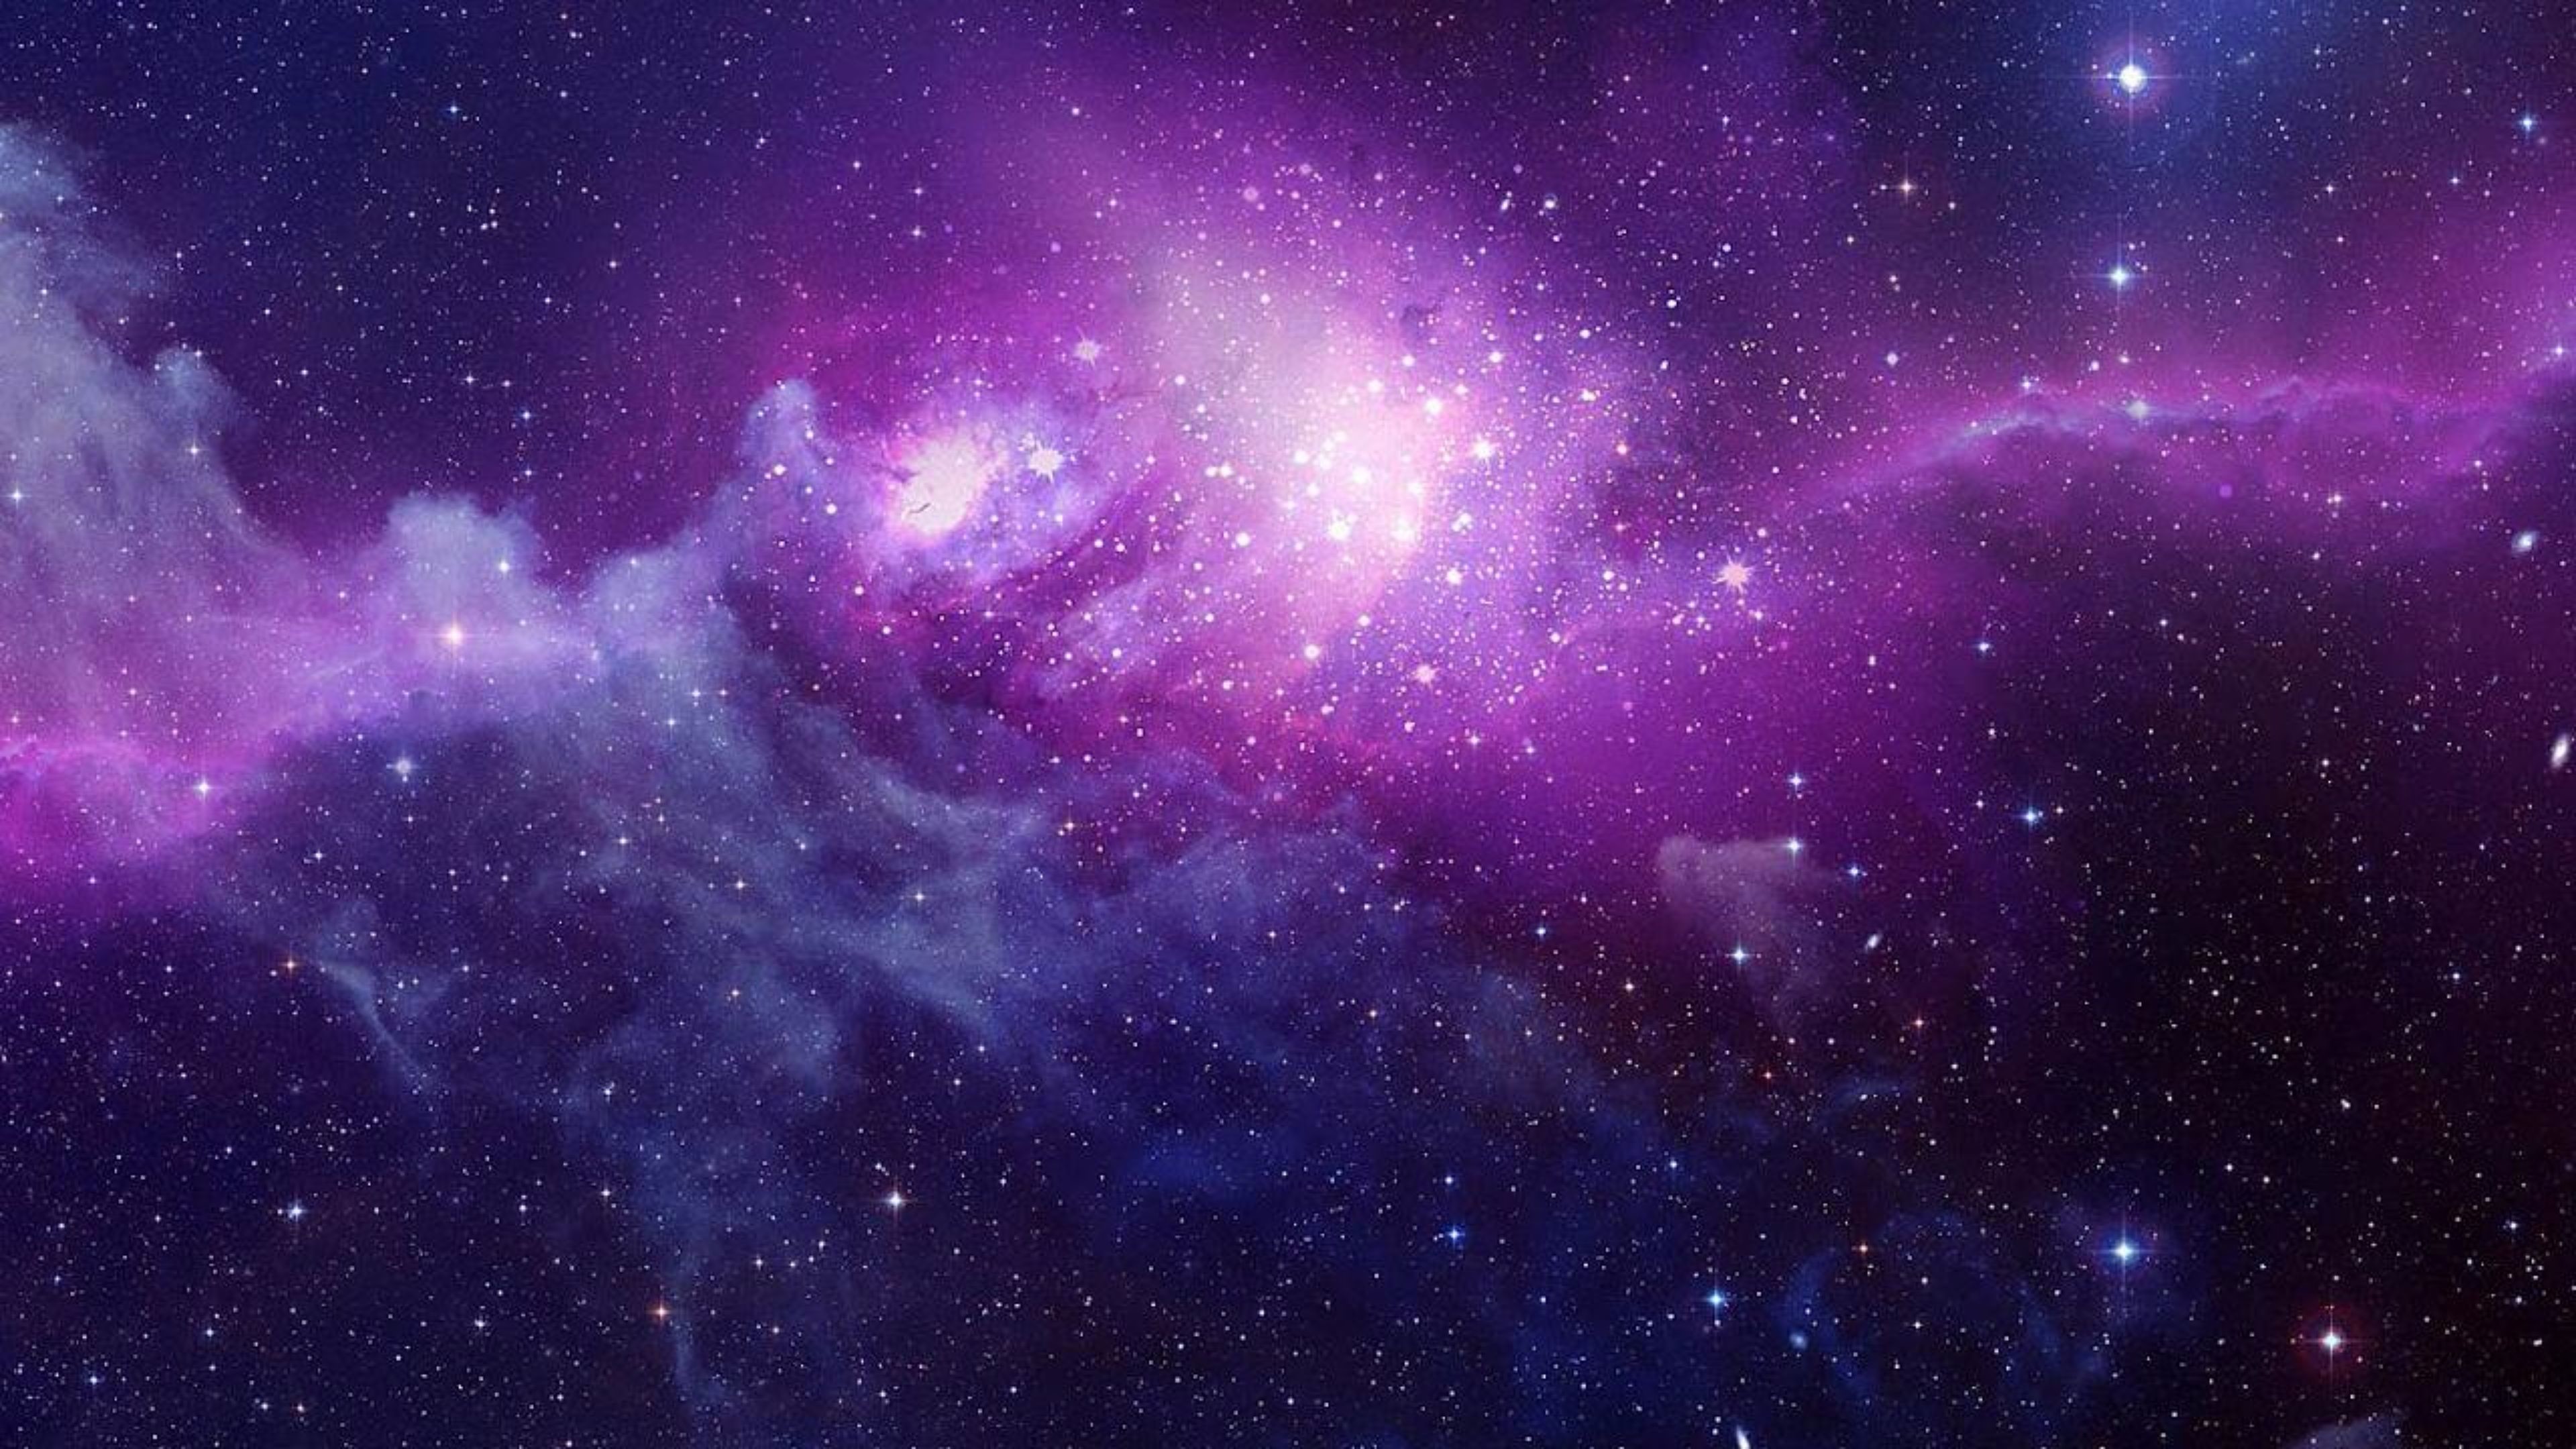 4K Space Wallpapers are the best… Here is a few I like.